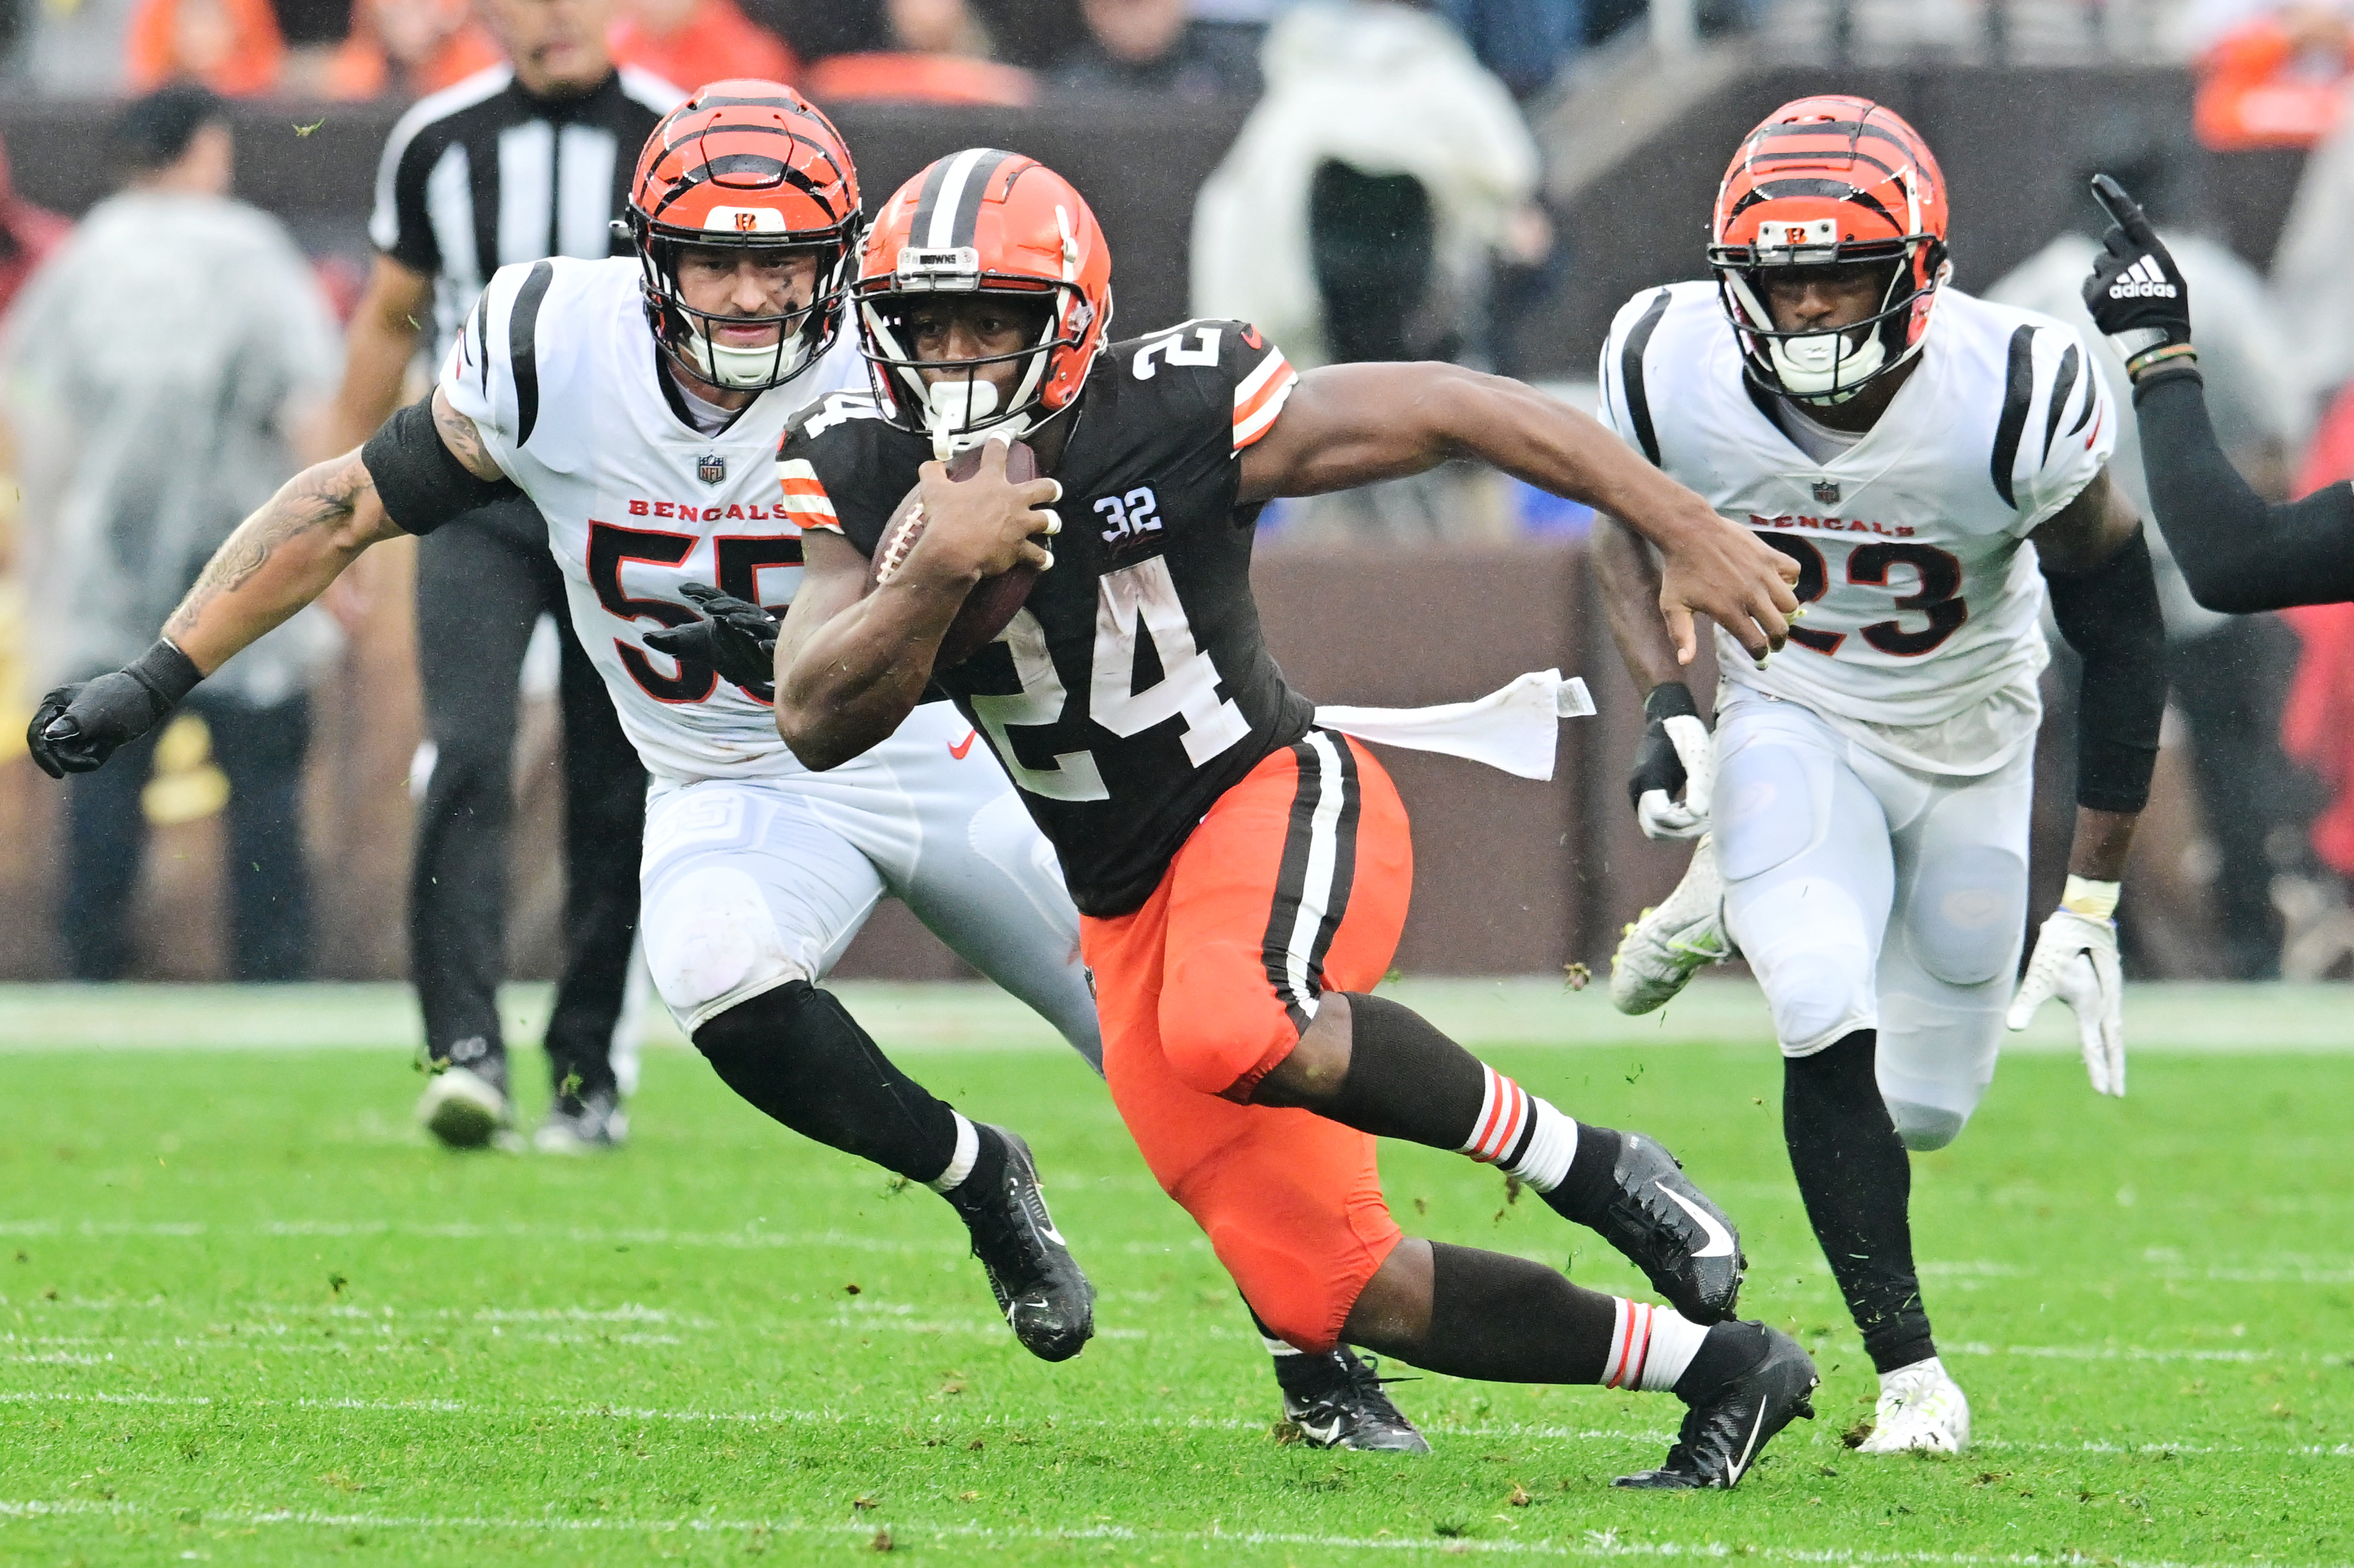 &nbsp;Cleveland Browns running back Nick Chubb (24) runs with the ball as Cincinnati Bengals linebacker Logan Wilson (55) and safety Dax Hill (23) defend during the first half at Cleveland Browns Stadium.